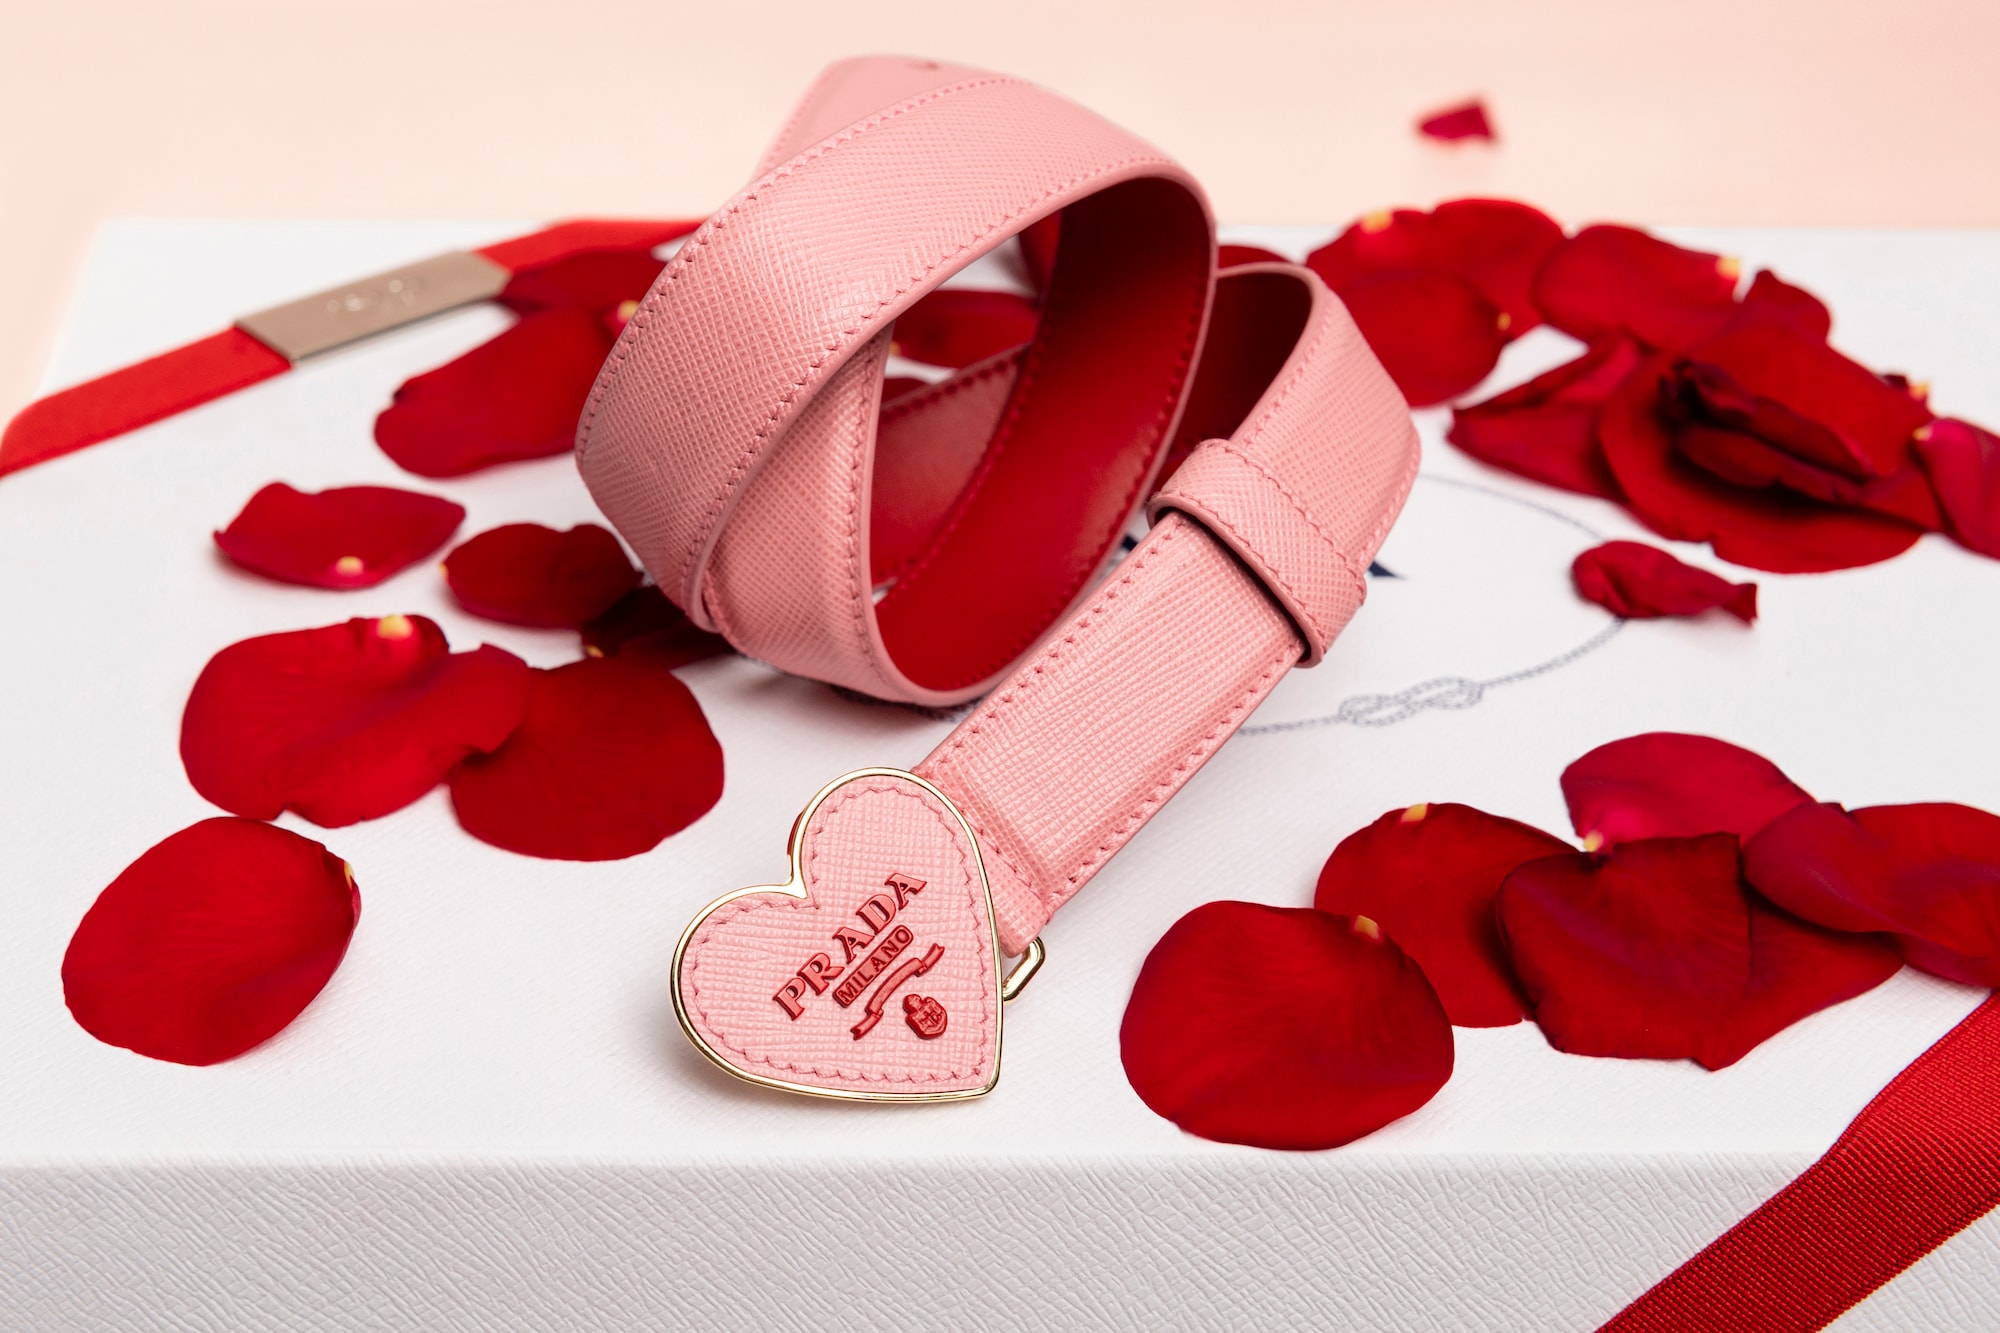 Prada Love Heart Bag and Accessories Collection Pink Red Qixi Festival Celebration Capsule 